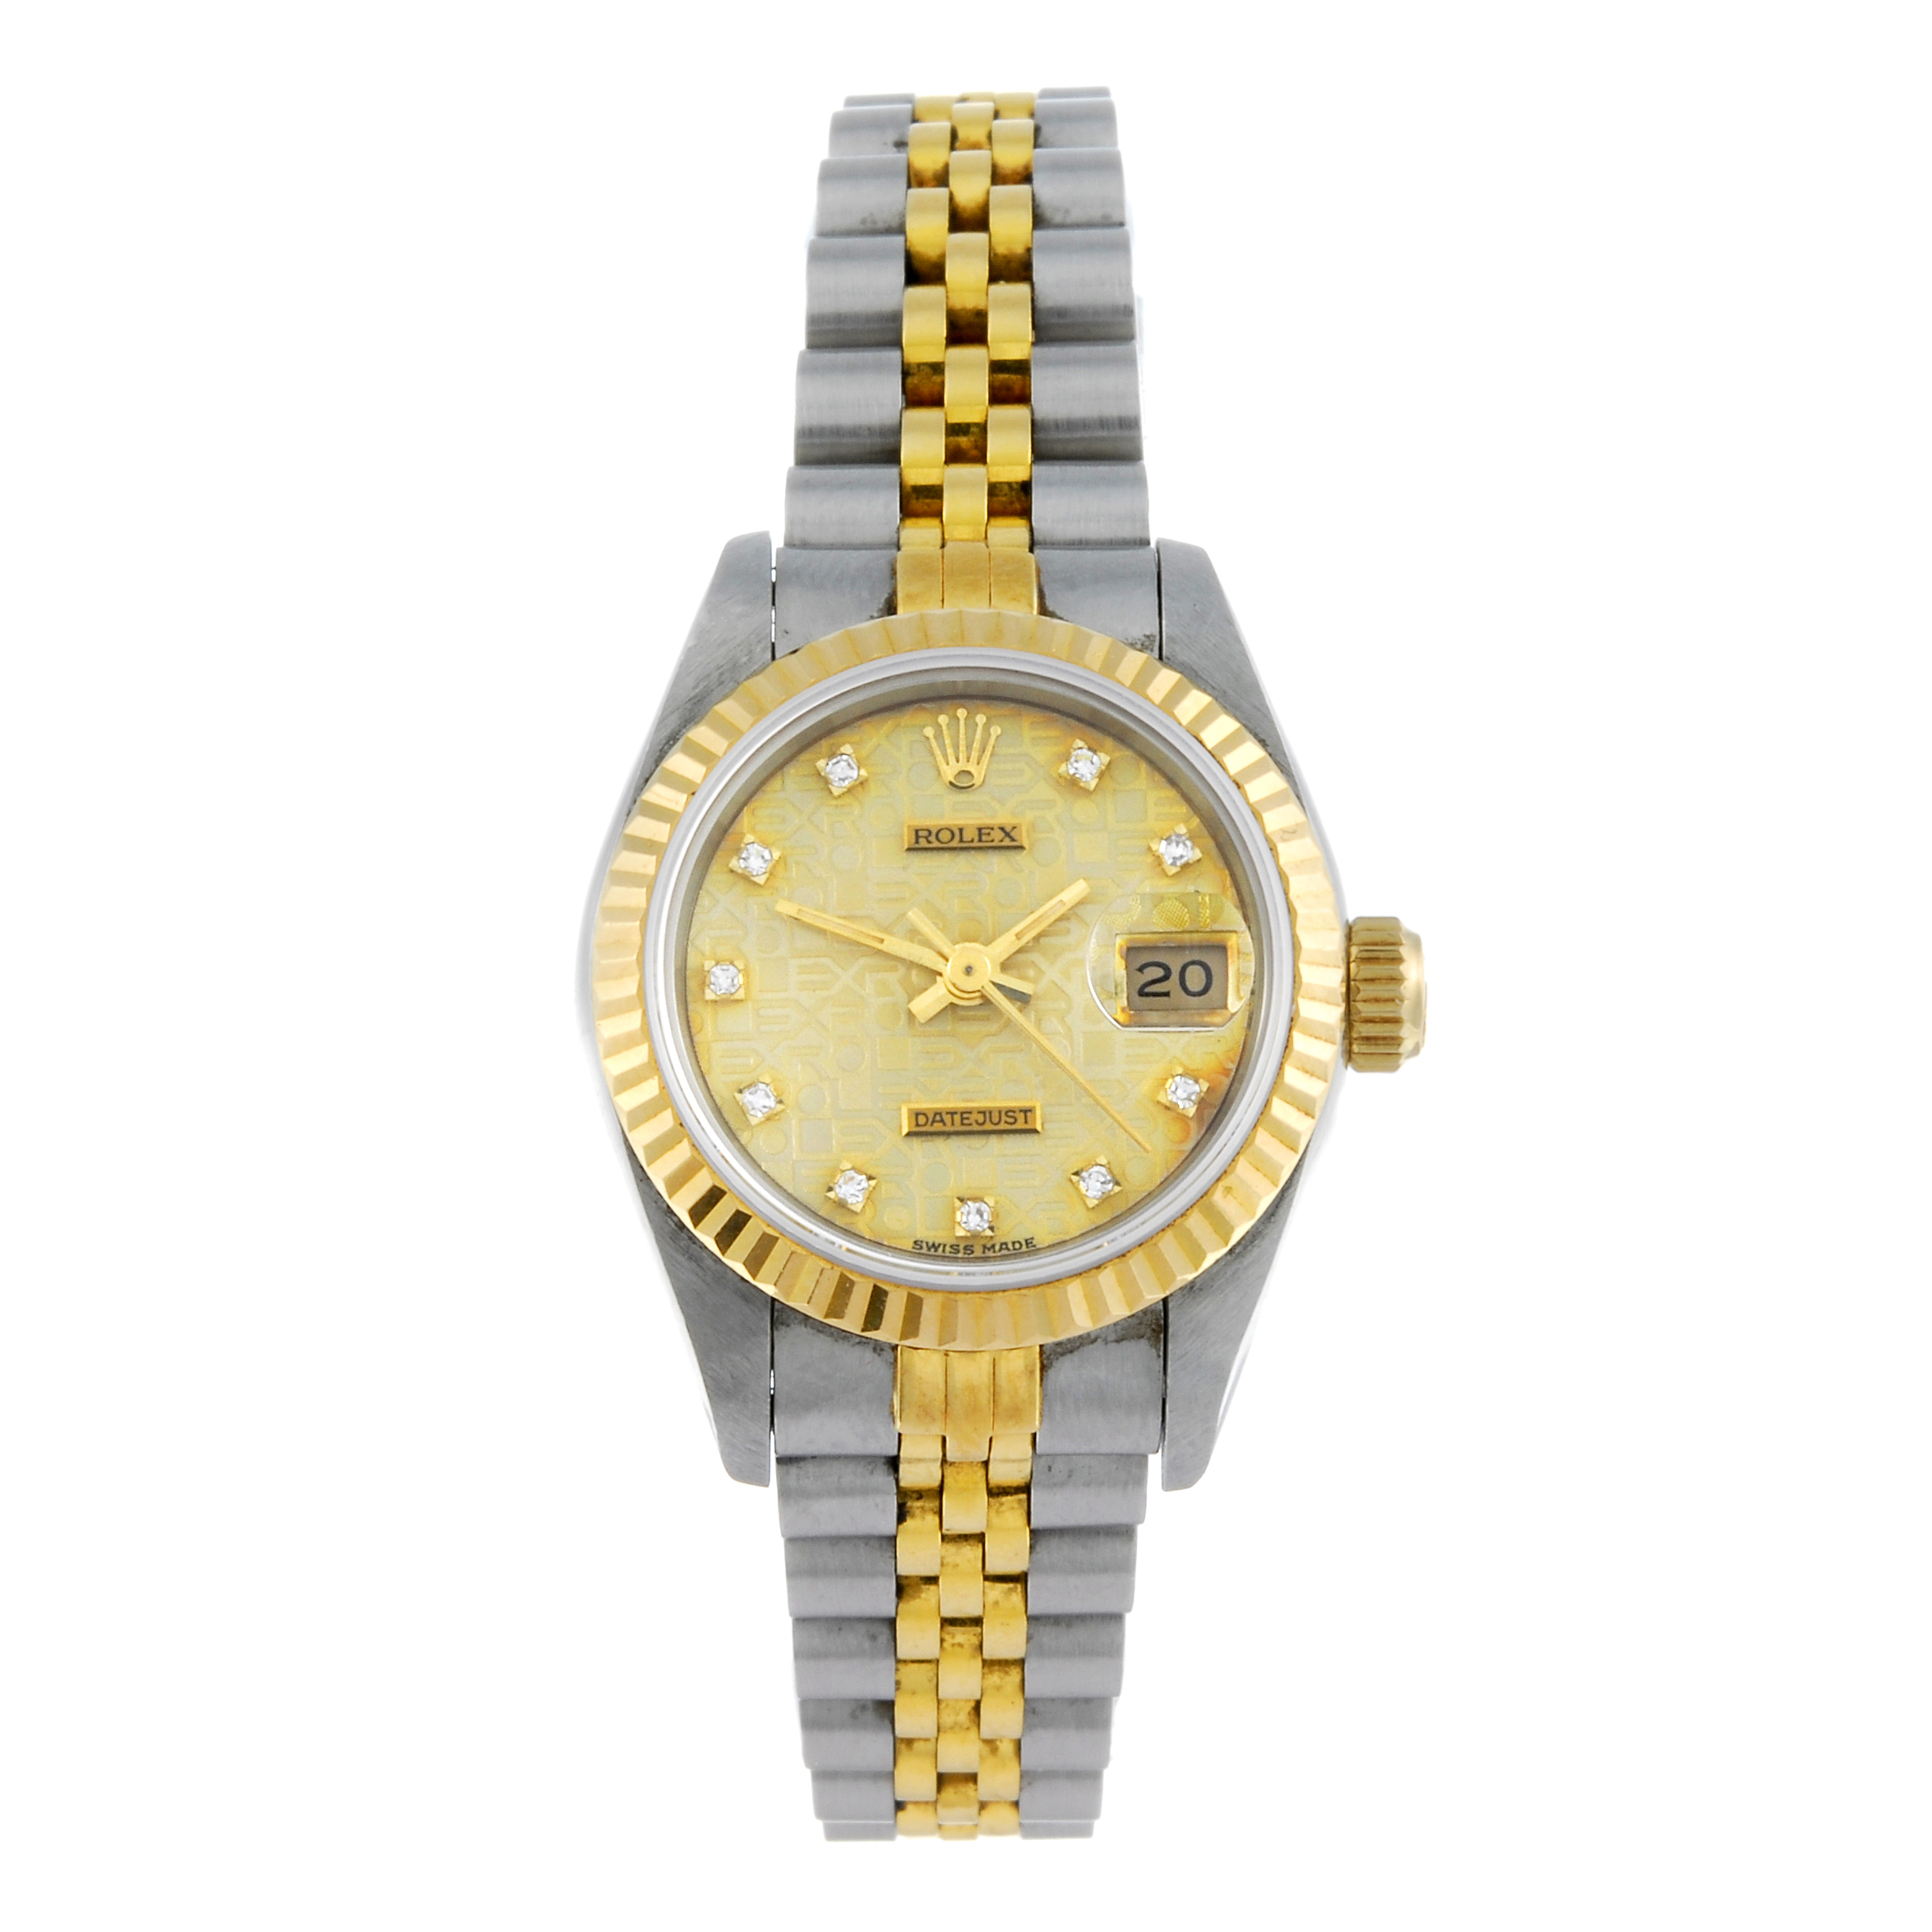 ROLEX - a lady's Oyster Perpetual Datejust bracelet watch. Circa 1991. Stainless steel case with